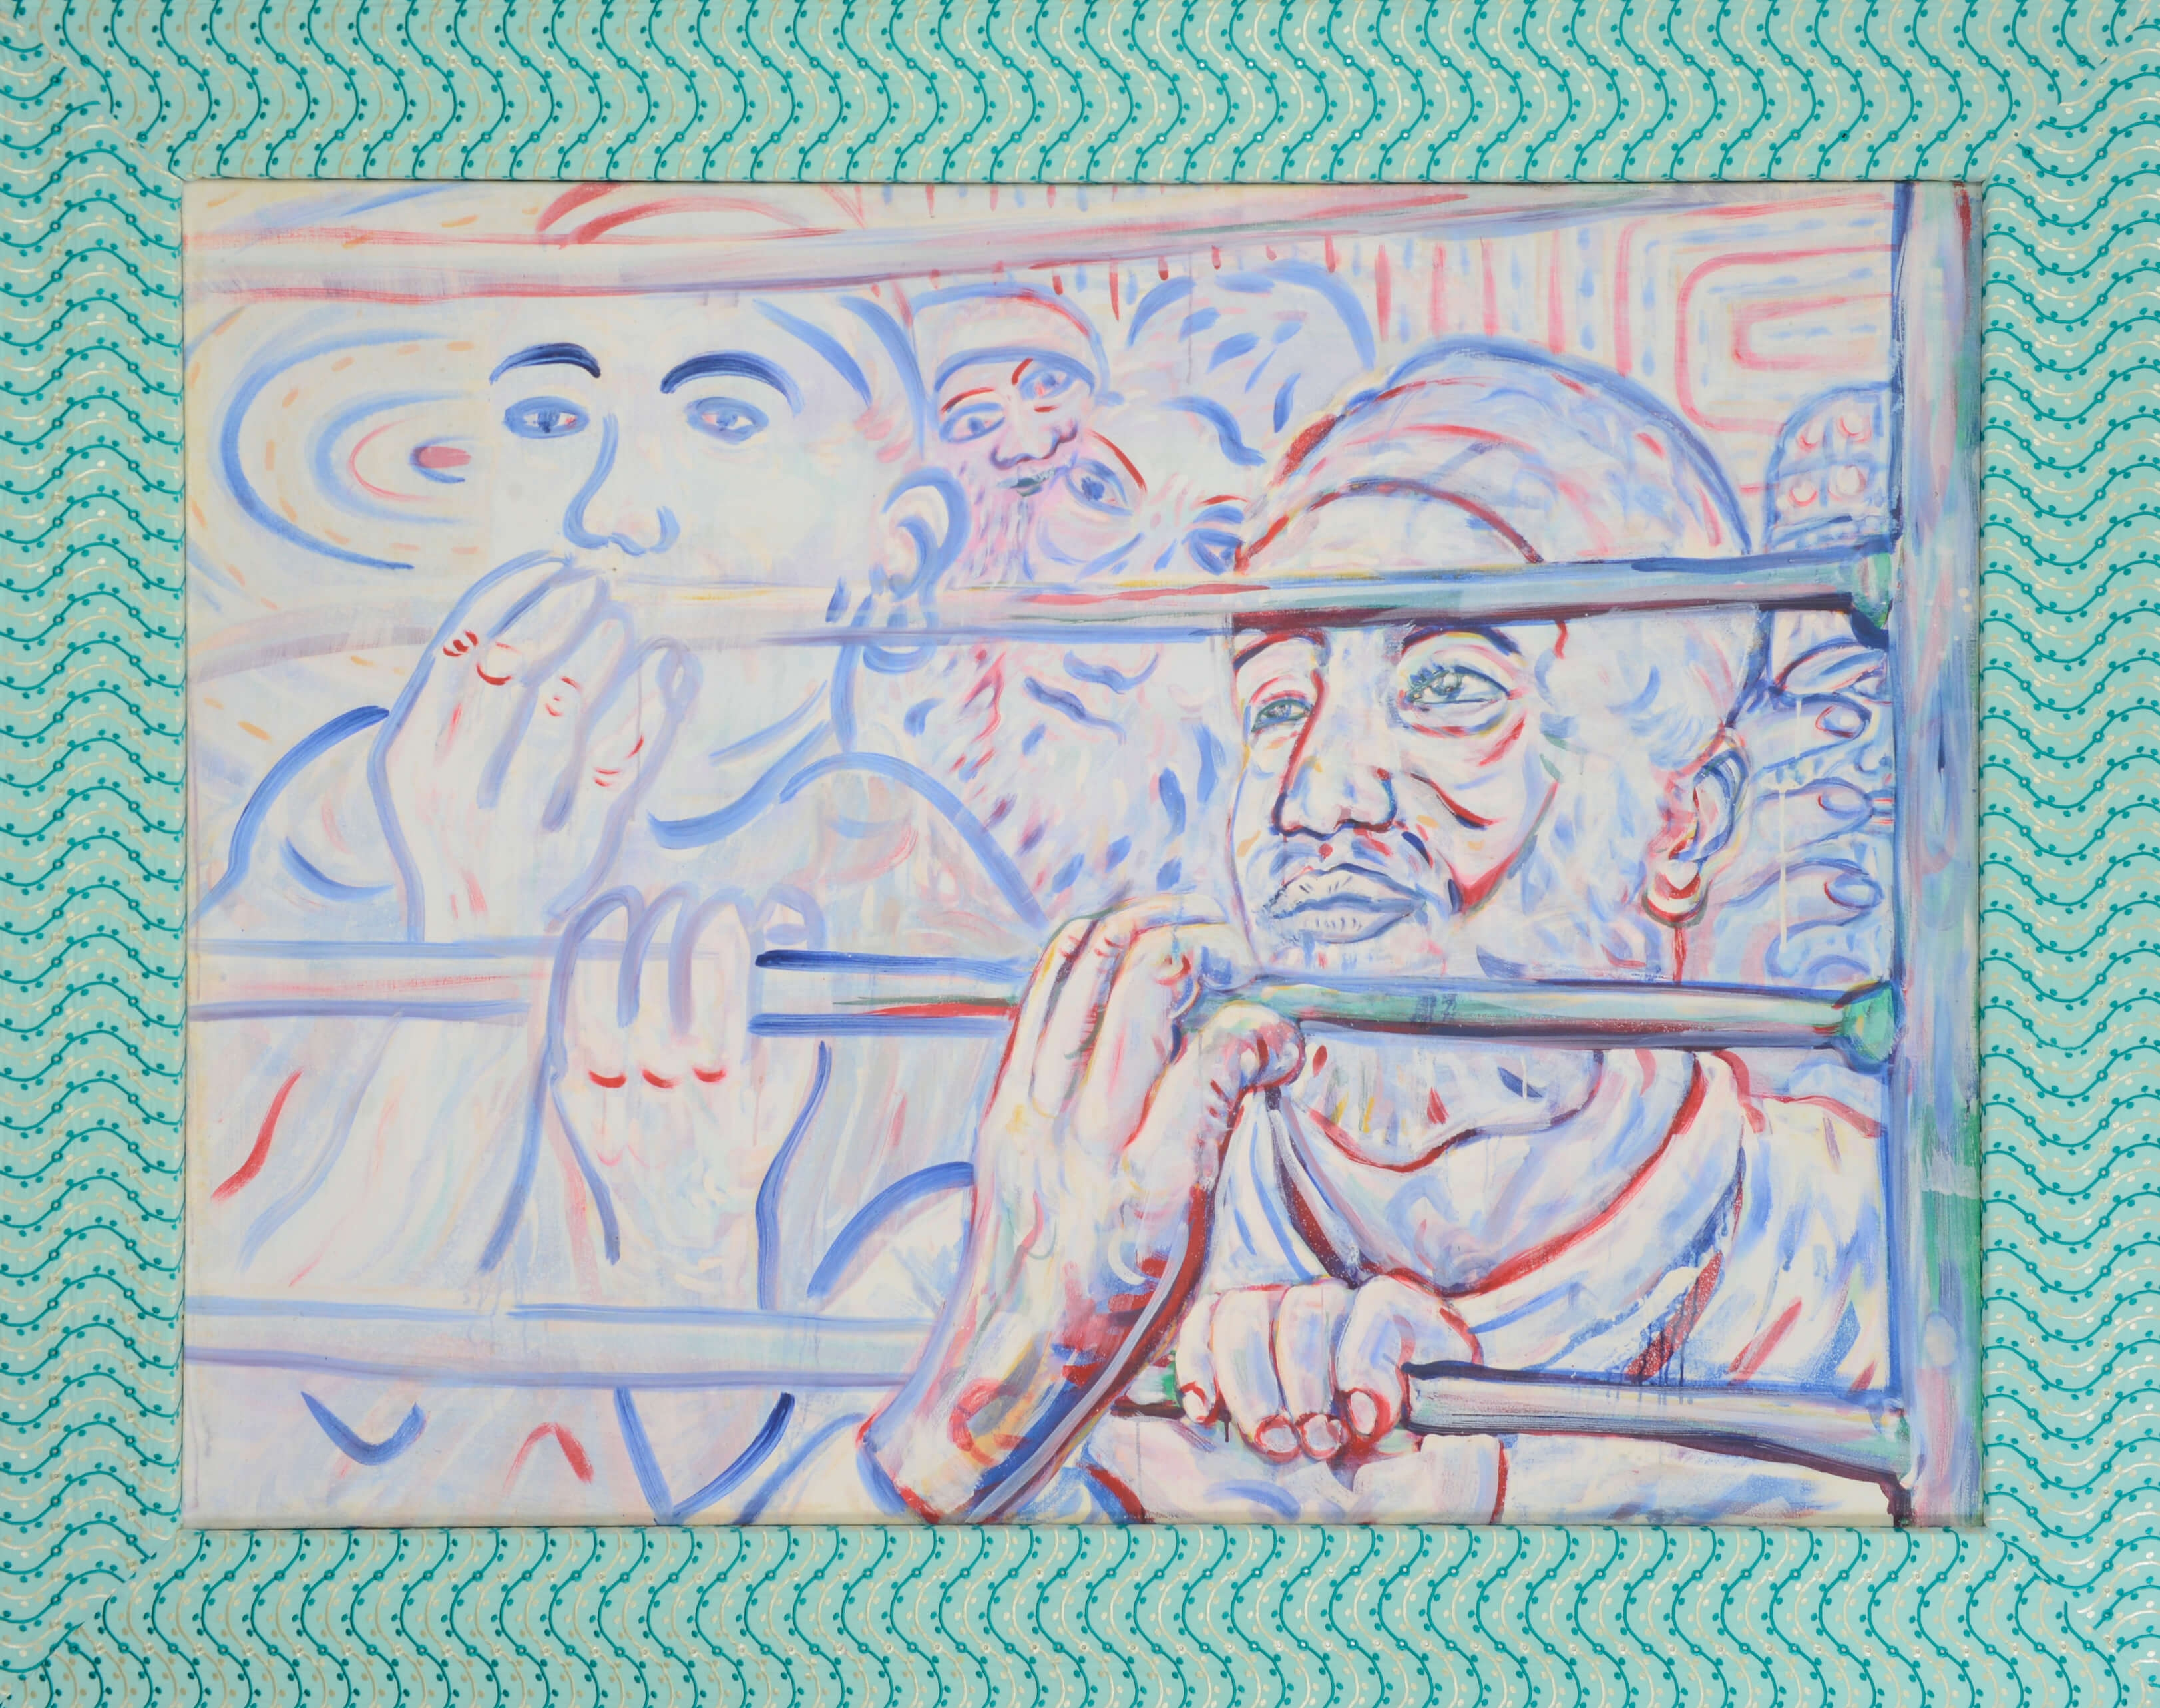 Artwork by Rob Birza, Behind bars, Made of Tempera on canvas